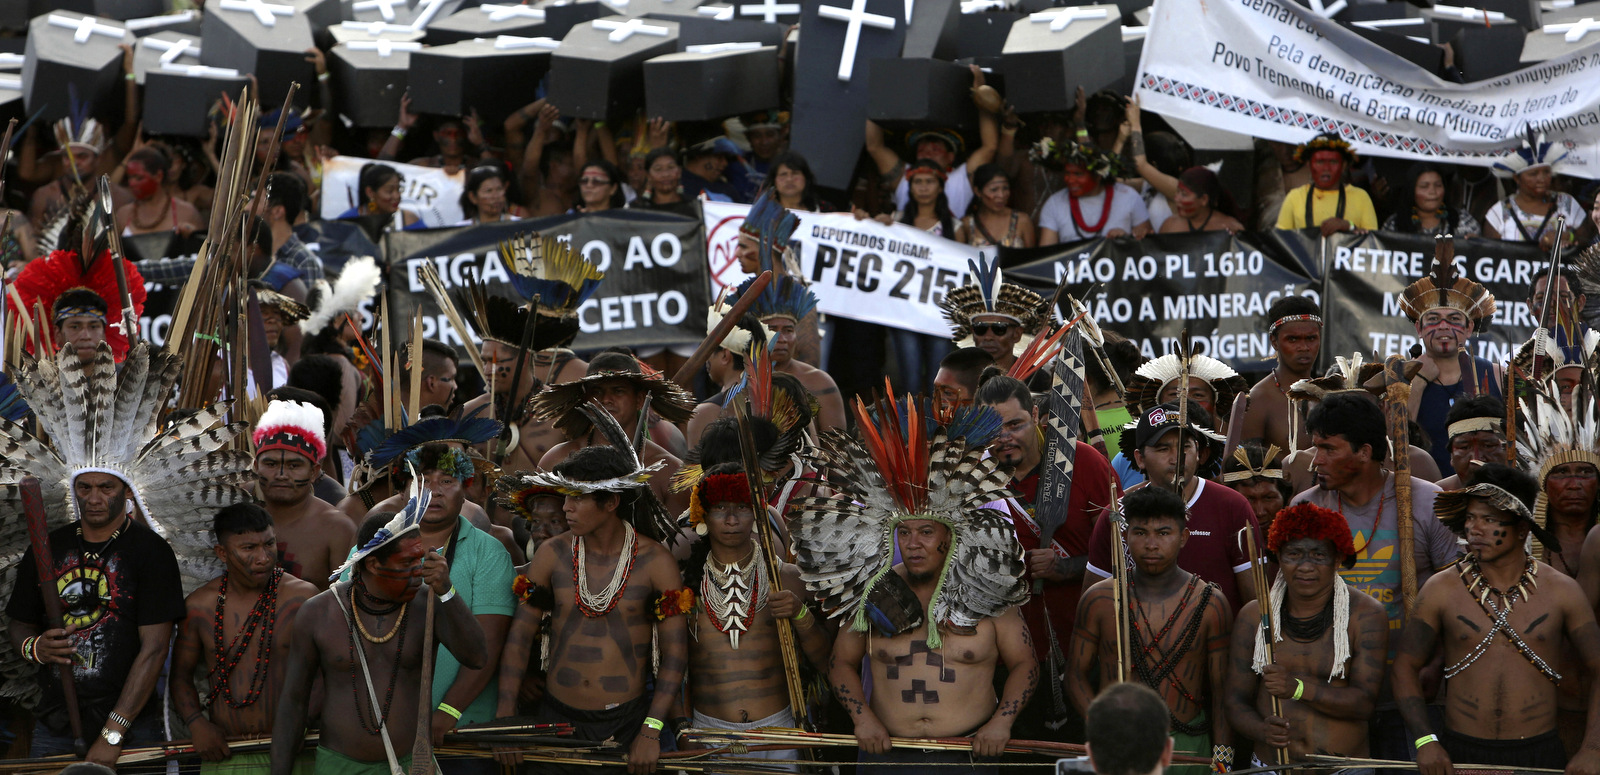 Thousands of indigenous people gather each April to demand recognition of the rights and lands.